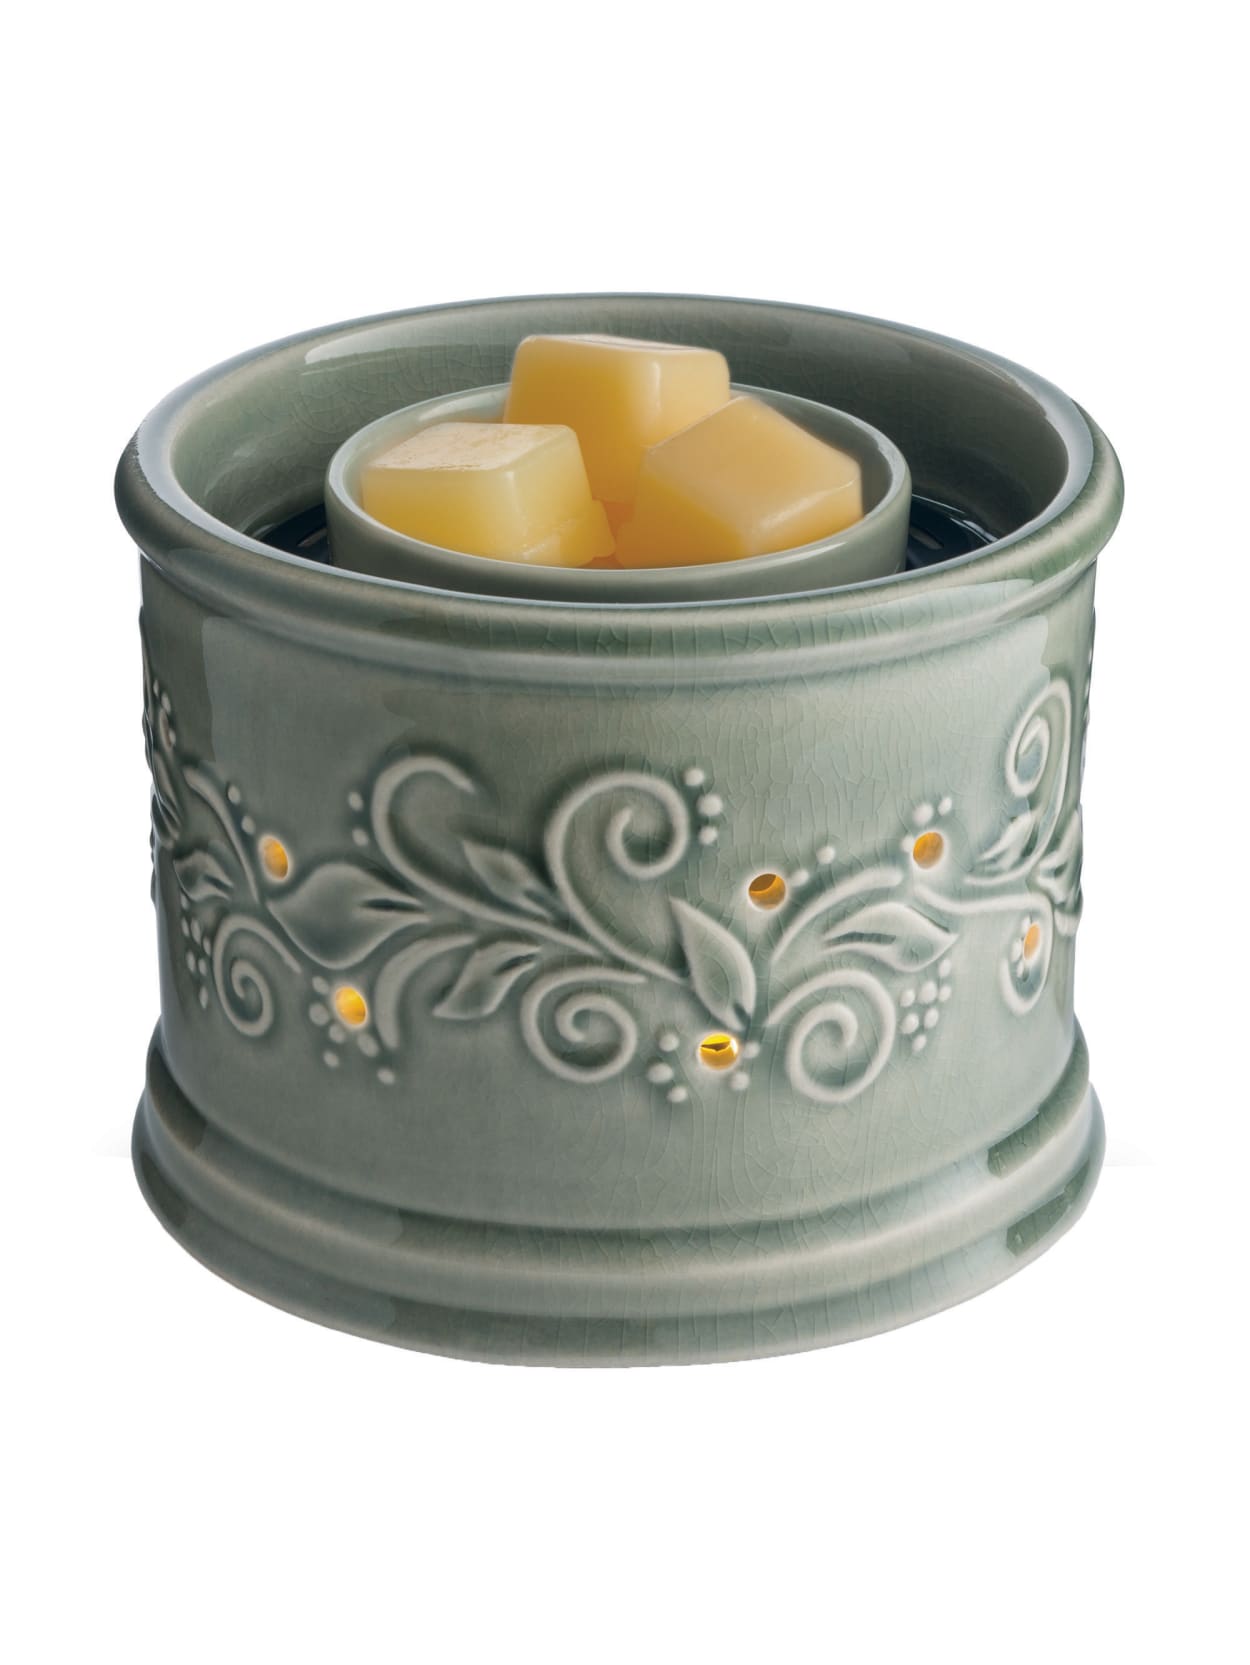 flameless candle warmer